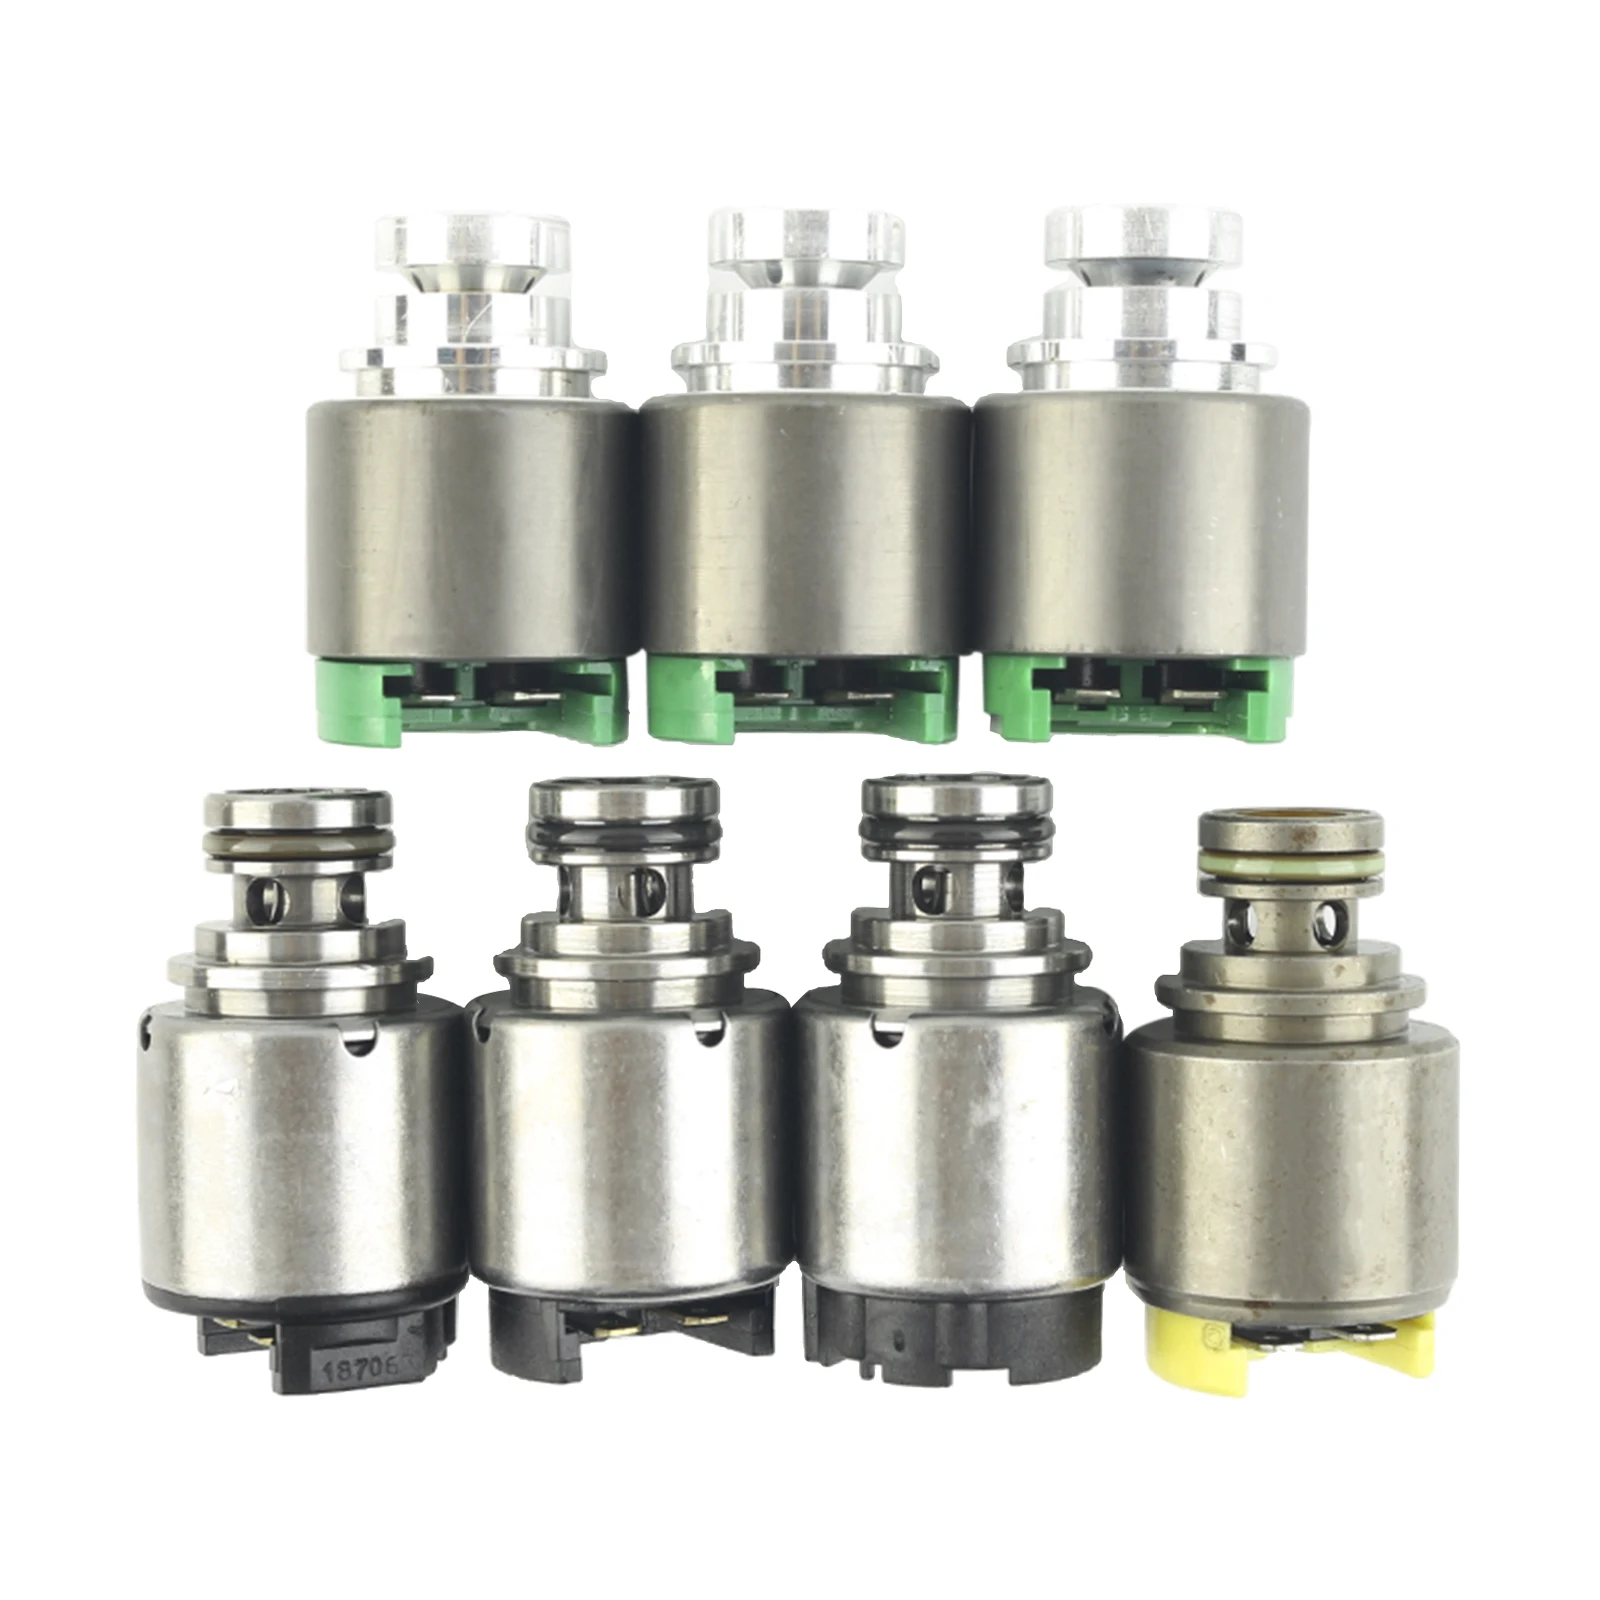 7PCS 5HP19 Transmission Solenoids for Audi A6 A8 S4 S6 RS6 ZF1068298035